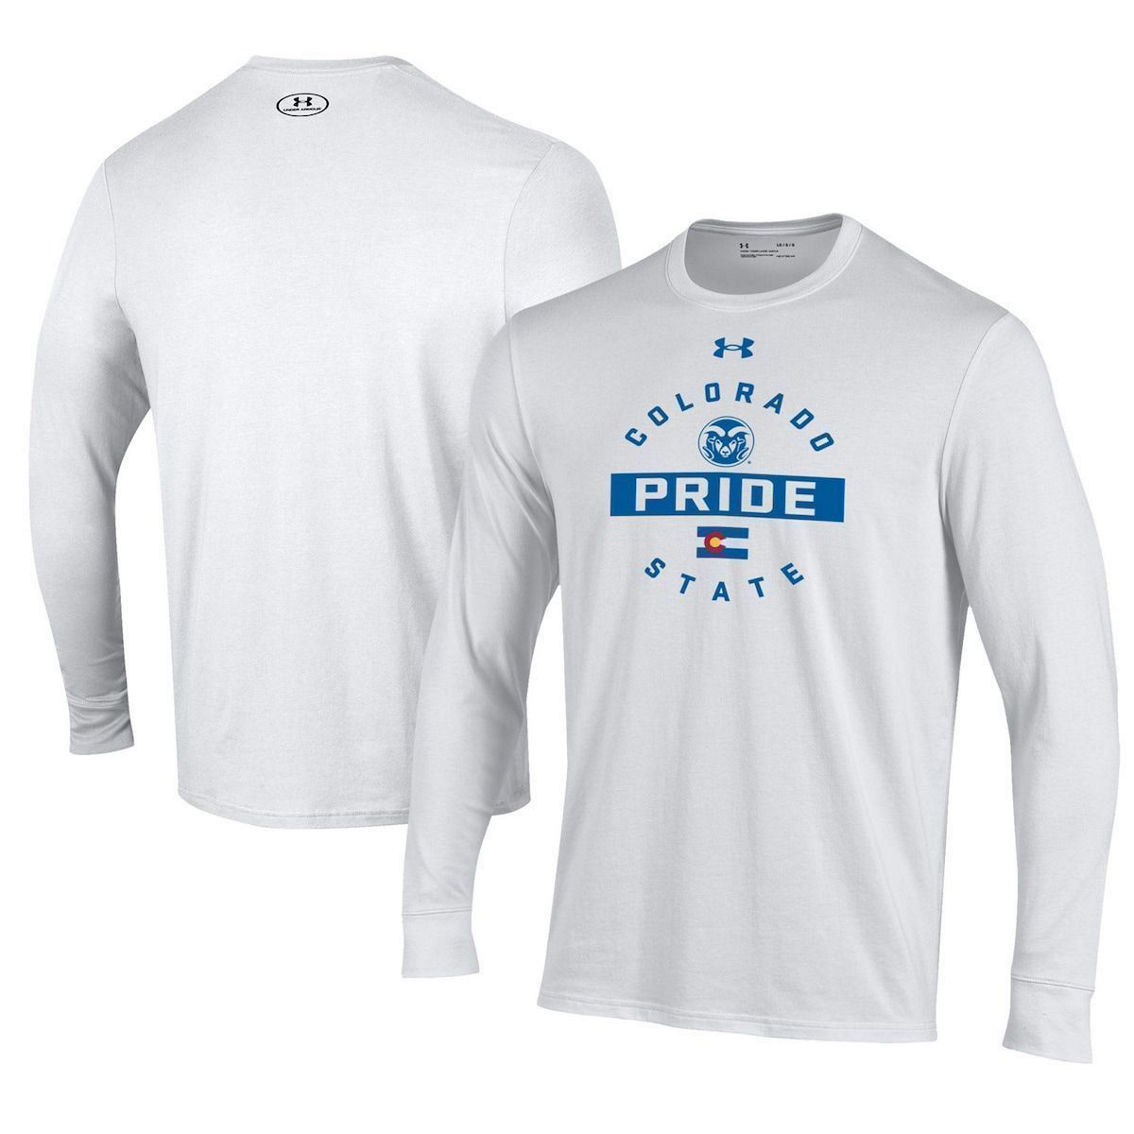 Under Armour Men's White Colorado State Rams Pride Long Sleeve T-Shirt - Image 2 of 4